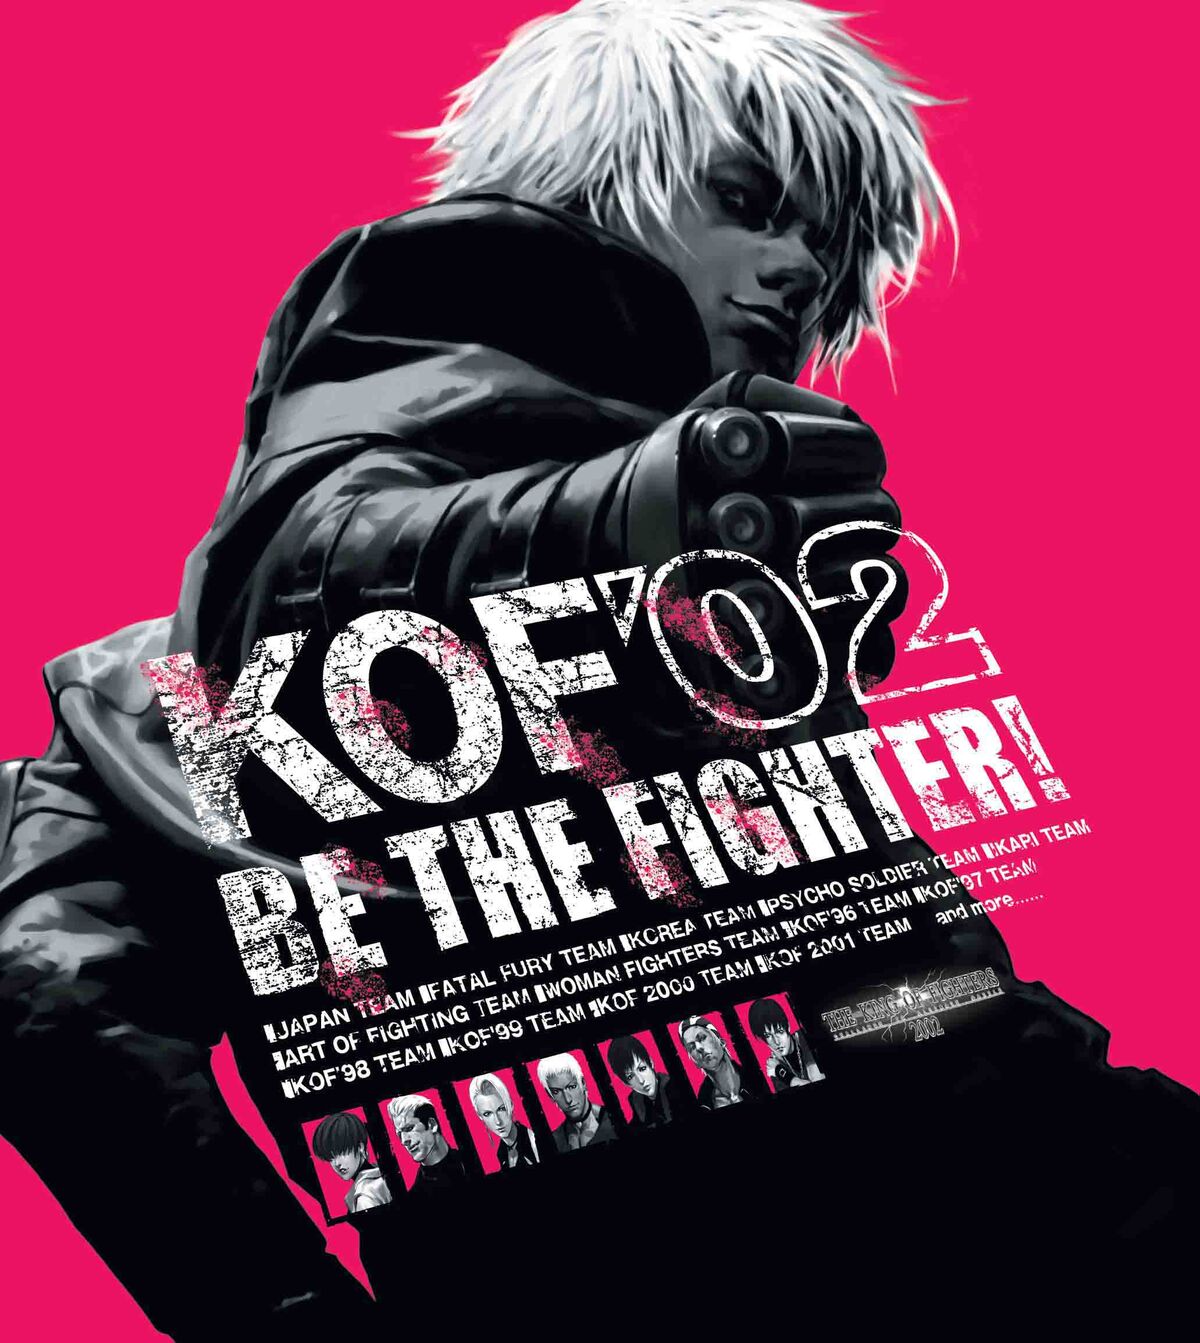 ACA NEOGEO THE KING OF FIGHTERS '96 for Nintendo Switch - Nintendo Official  Site